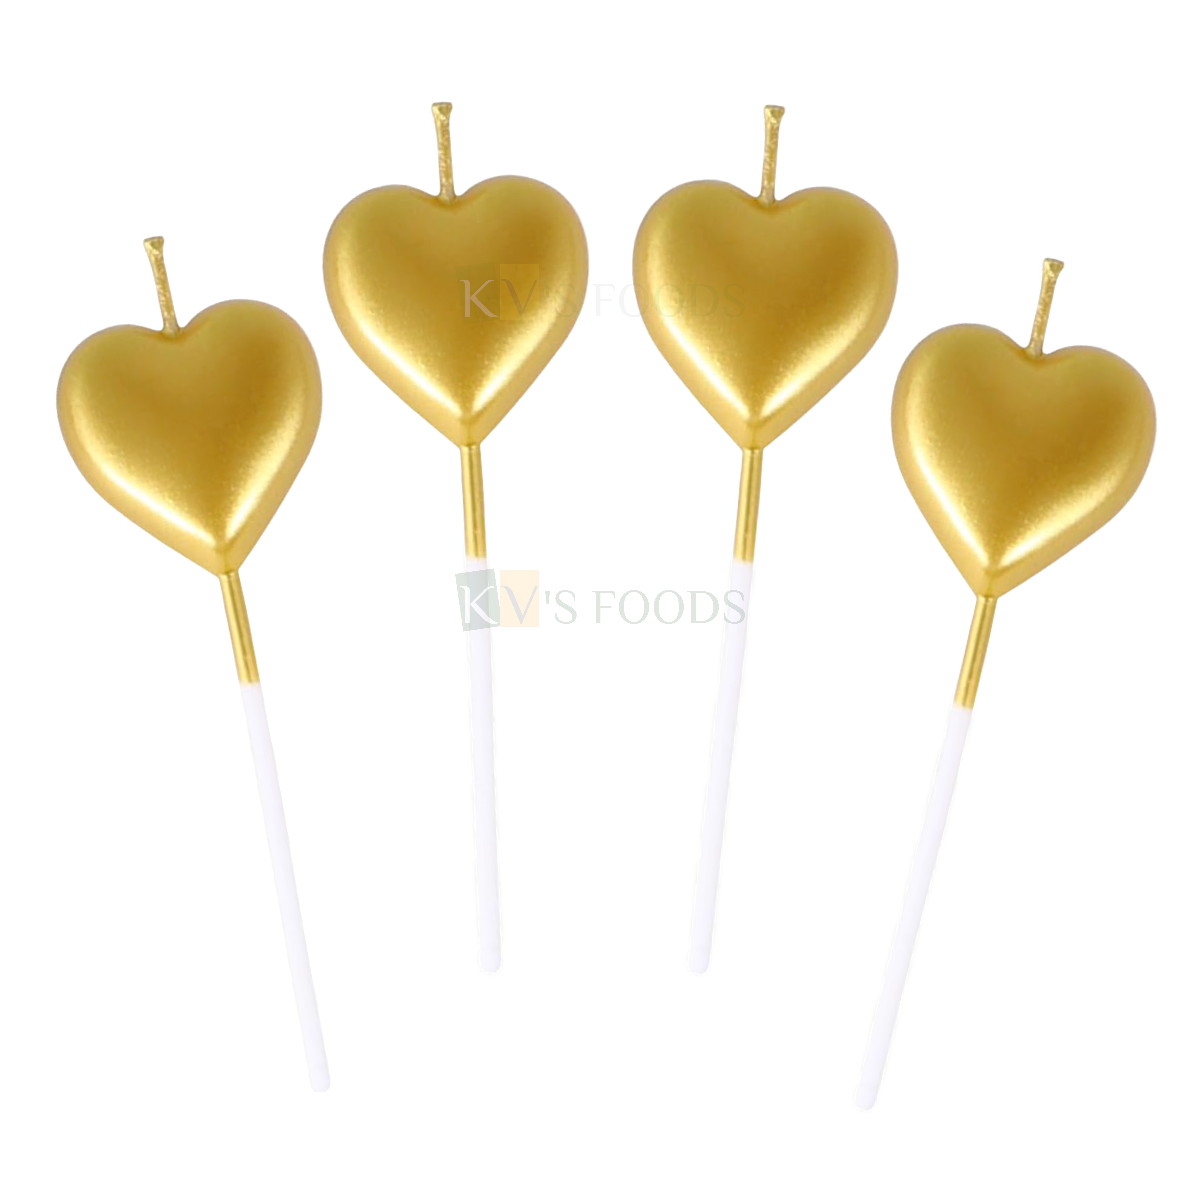 4 PCS Shiny Golden Colour Metallic Heart Shape Wax Candles Cake and Cupcake Inserts Wedding Anniversary Love Valentine's Cakes Decorations Happy Birthday Theme Gold Heart DIY Cake Decorations